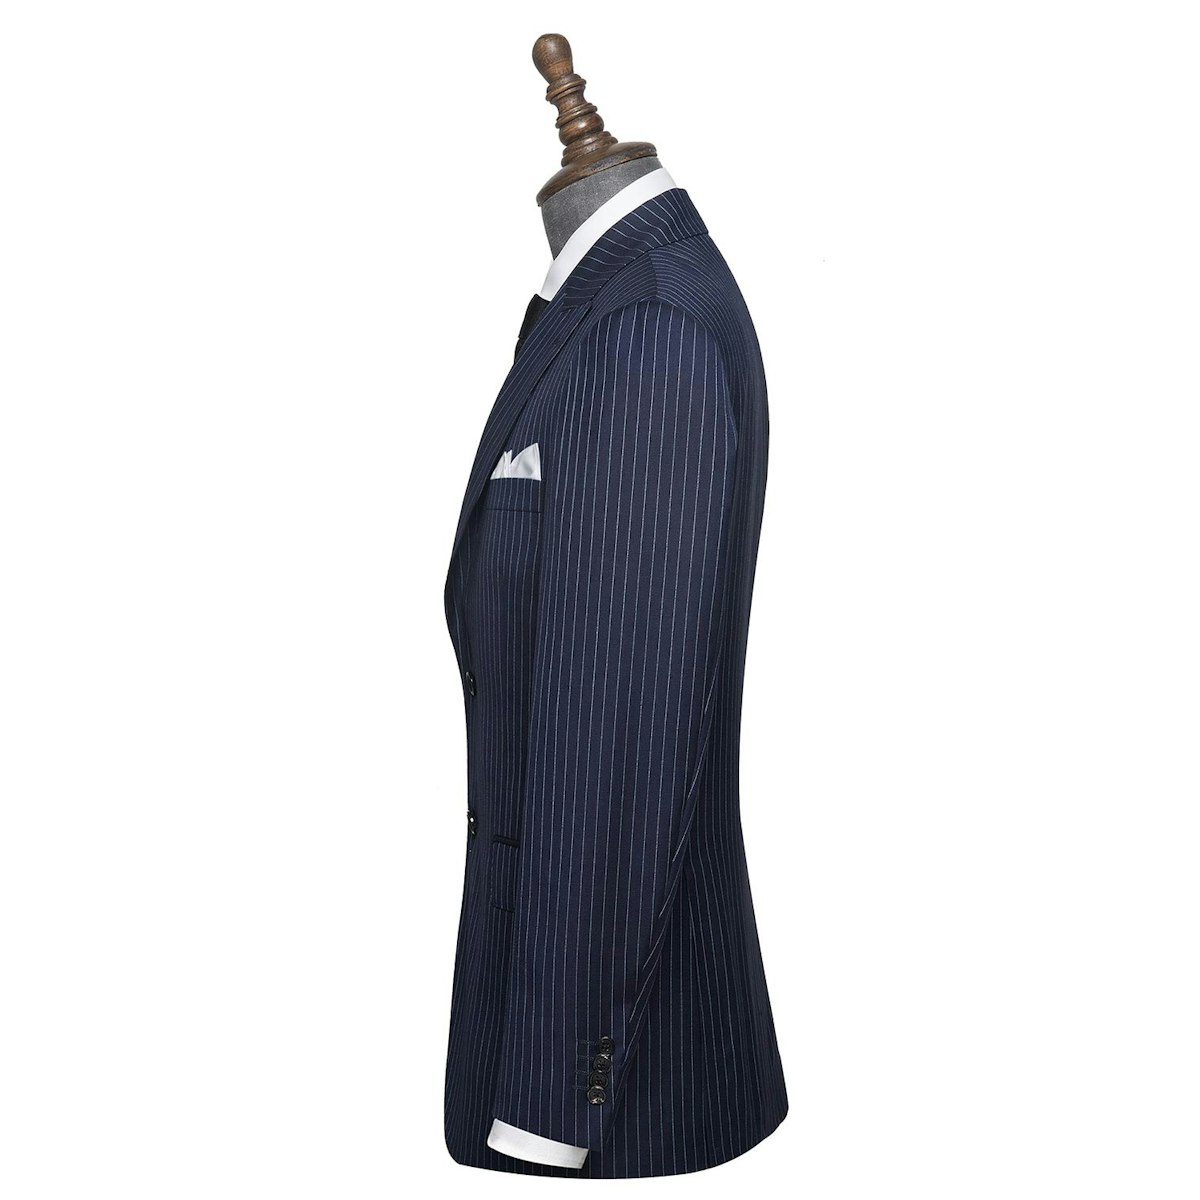 InStitchu Collection The Grimsby mens suit